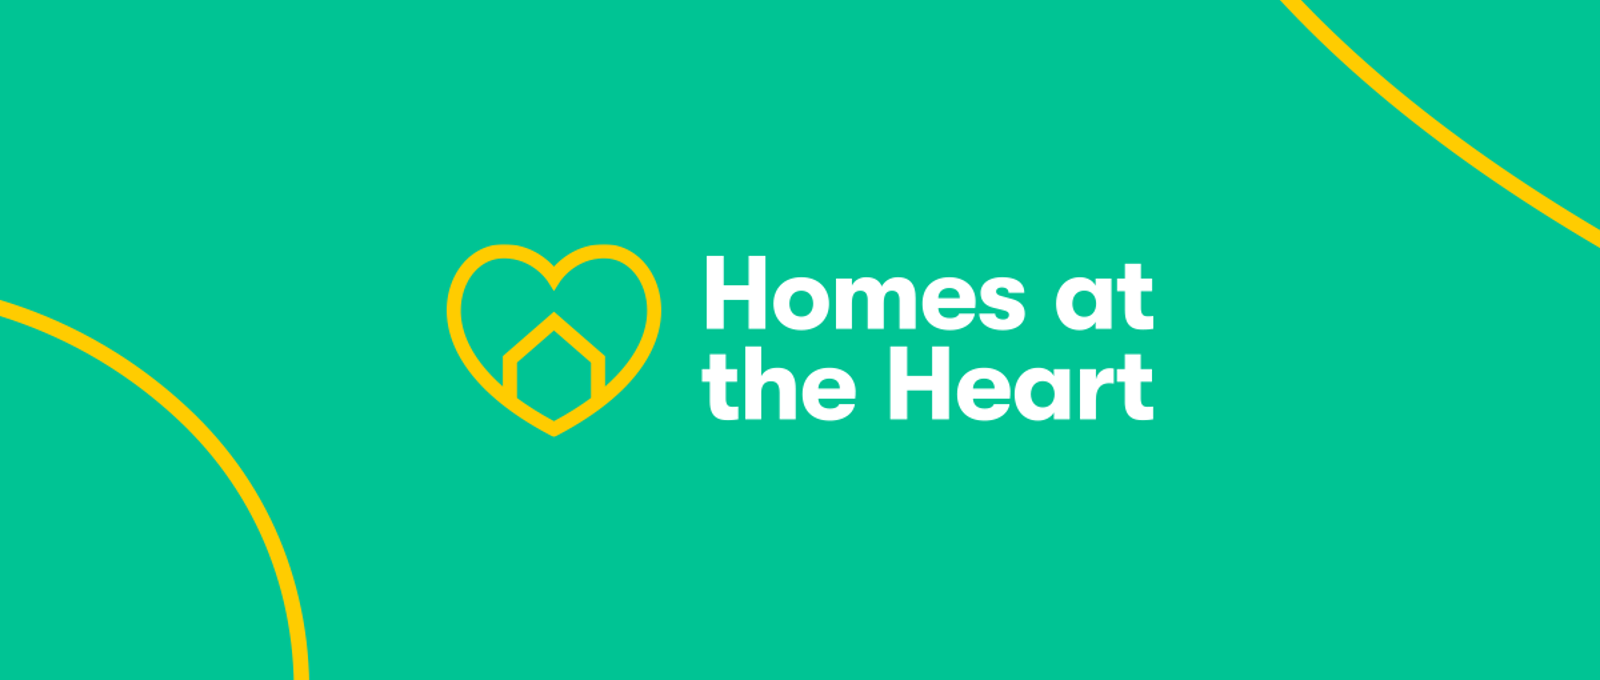 The Homes at the Heart logo